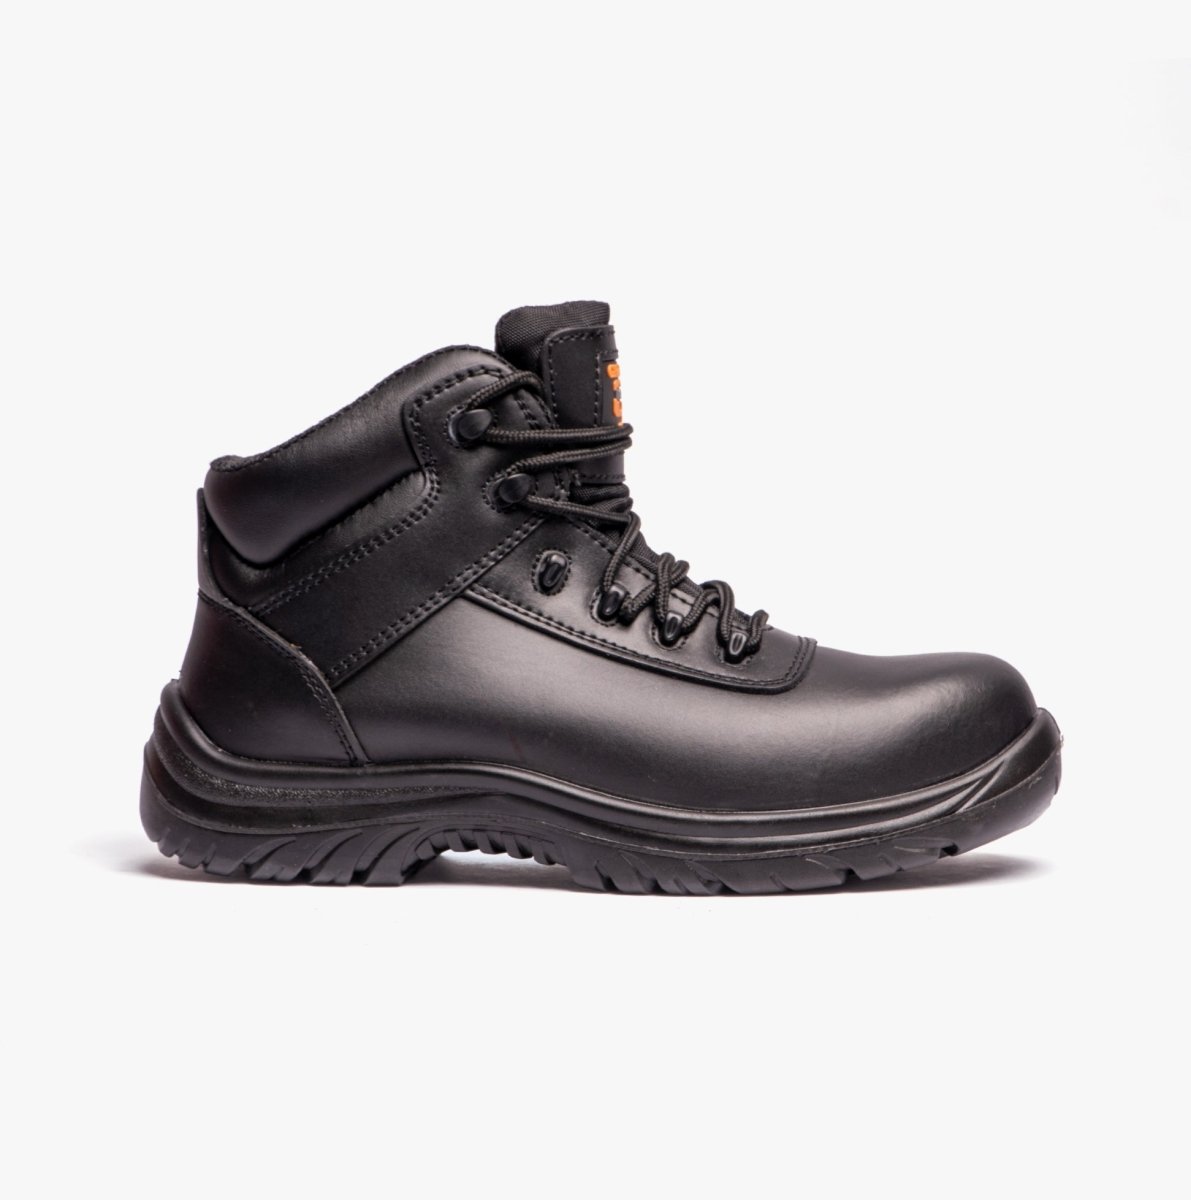 Grafters M466A Unisex Leather Safety Boots Black M466A - 37 | STB.co.uk